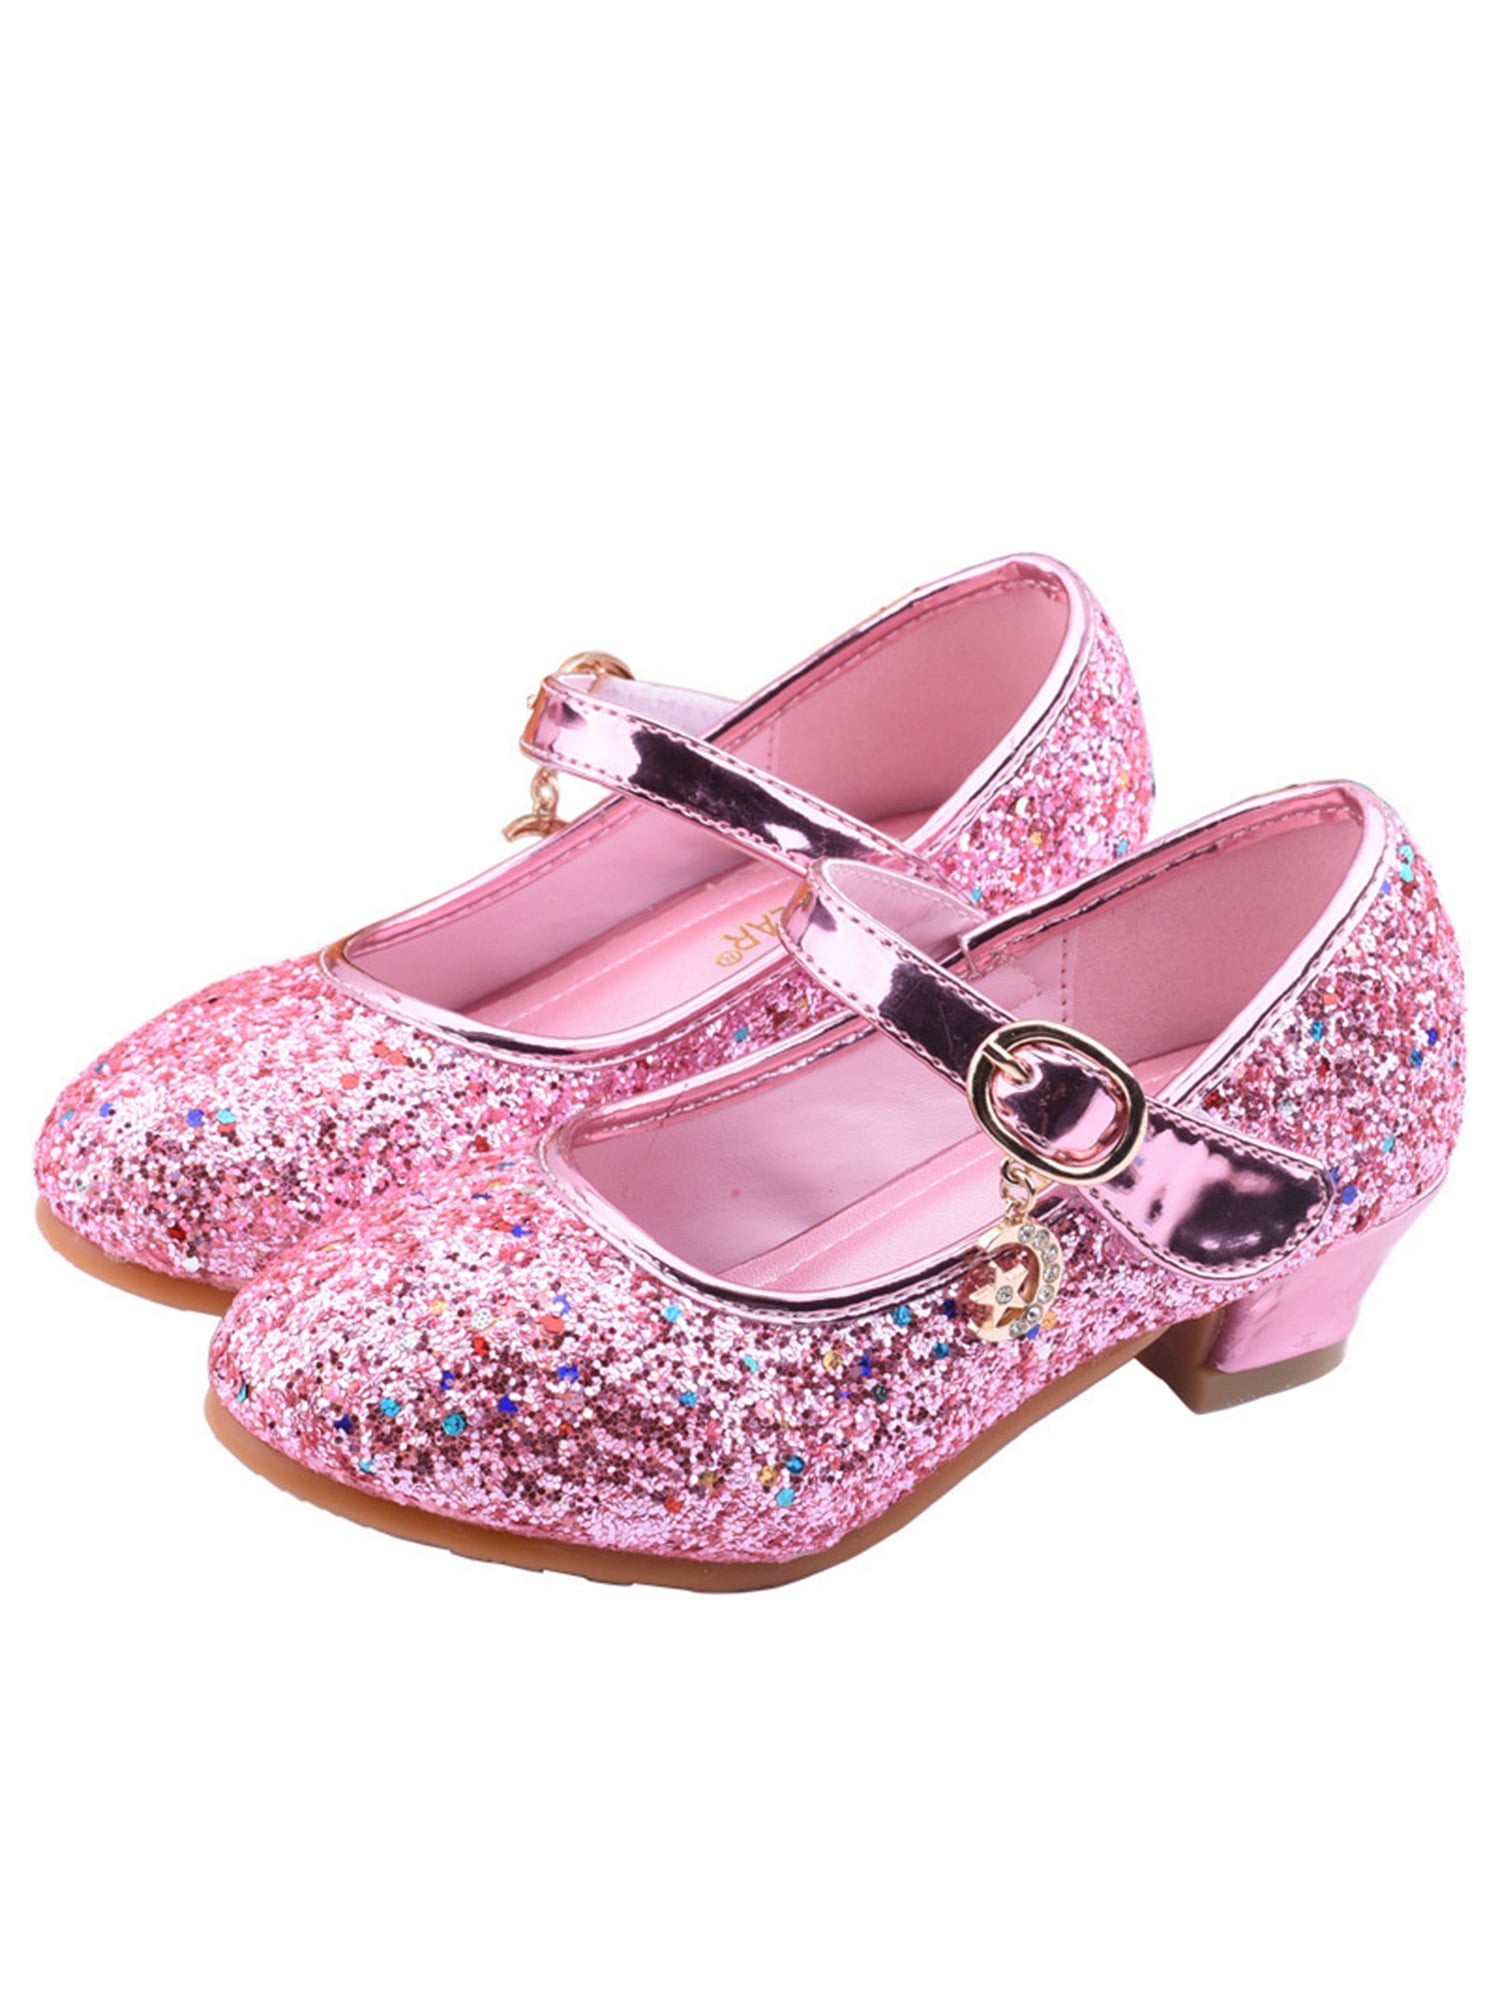 ADAMUMU Low Heel Dress Shoes Toddler Princes Shoes Sparkle Girls Mary Jane Wedding Shoes Flower for Children in Wedding Party Uniform School Daily Wear 